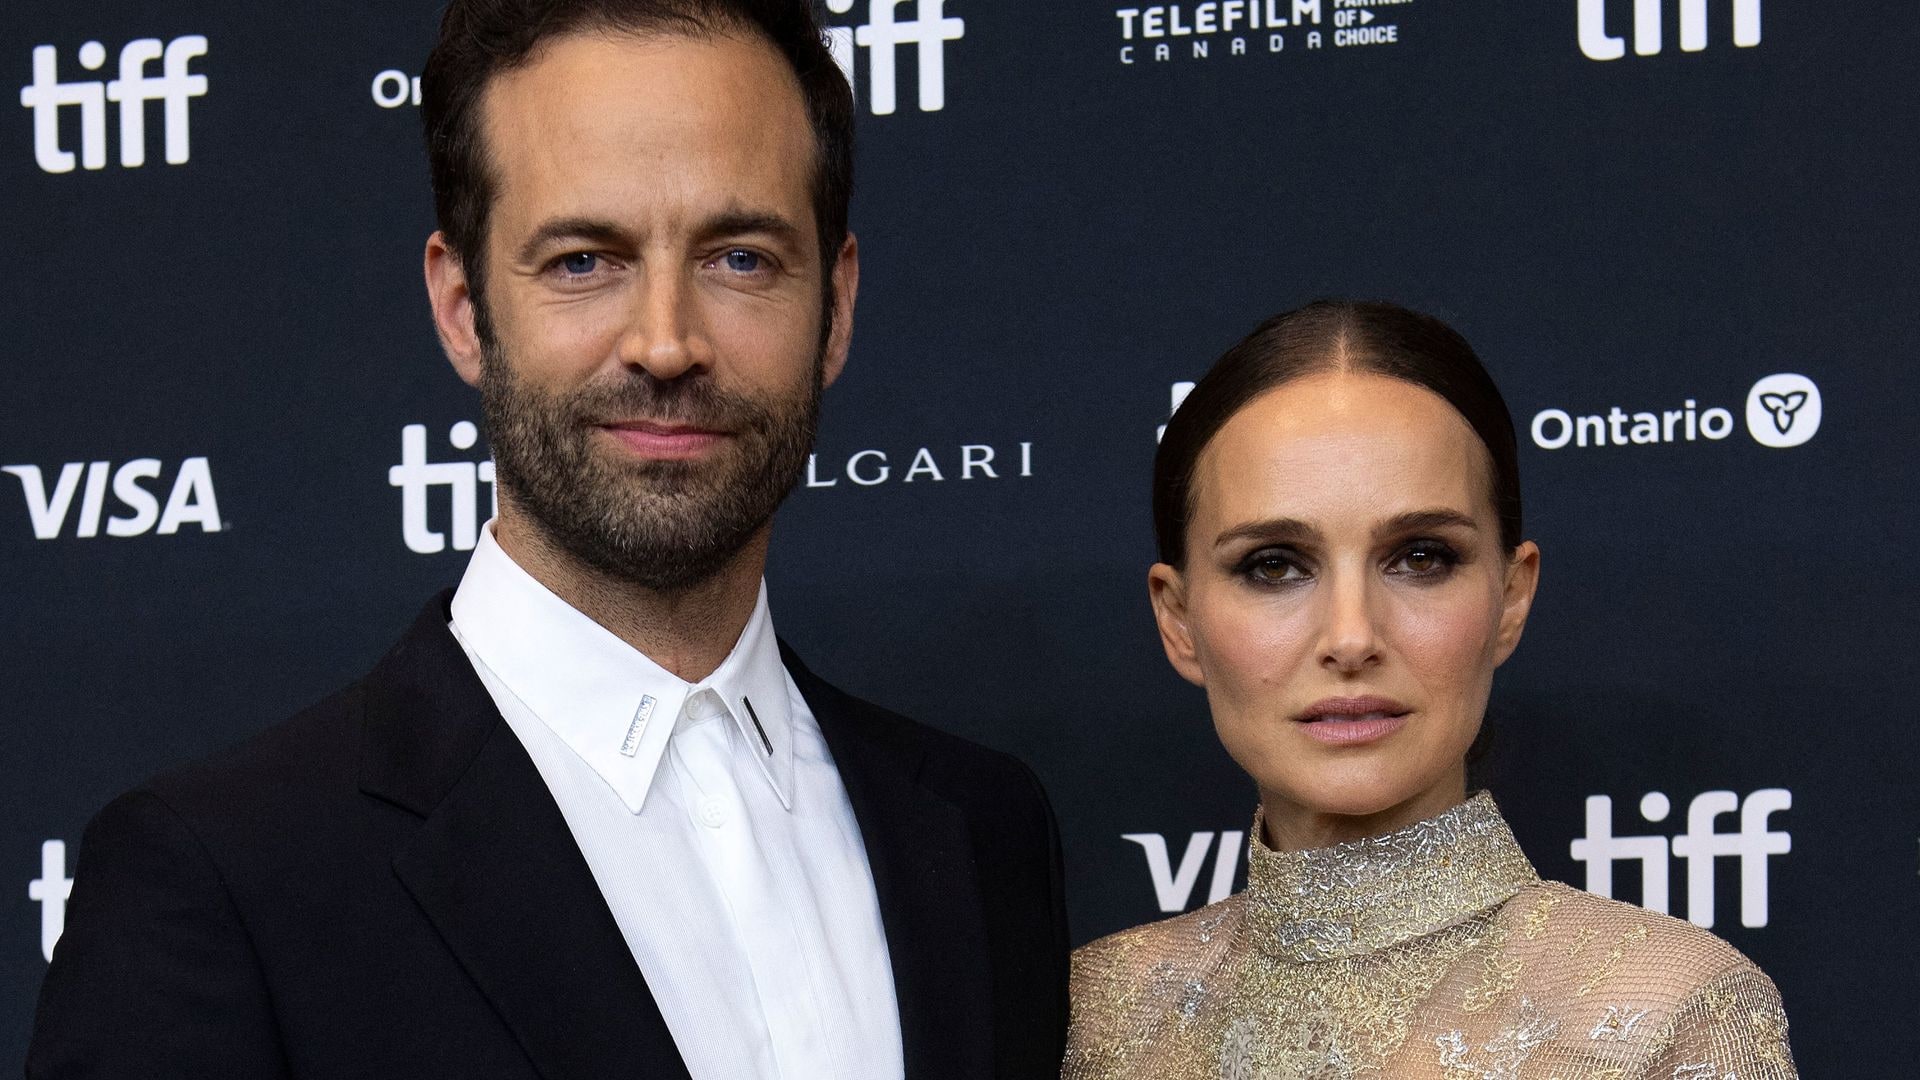 Natalie Portman and Benjamin Millepied attend the red carpet for the premiere of Carmen during the 2022 Toronto International Film Festival